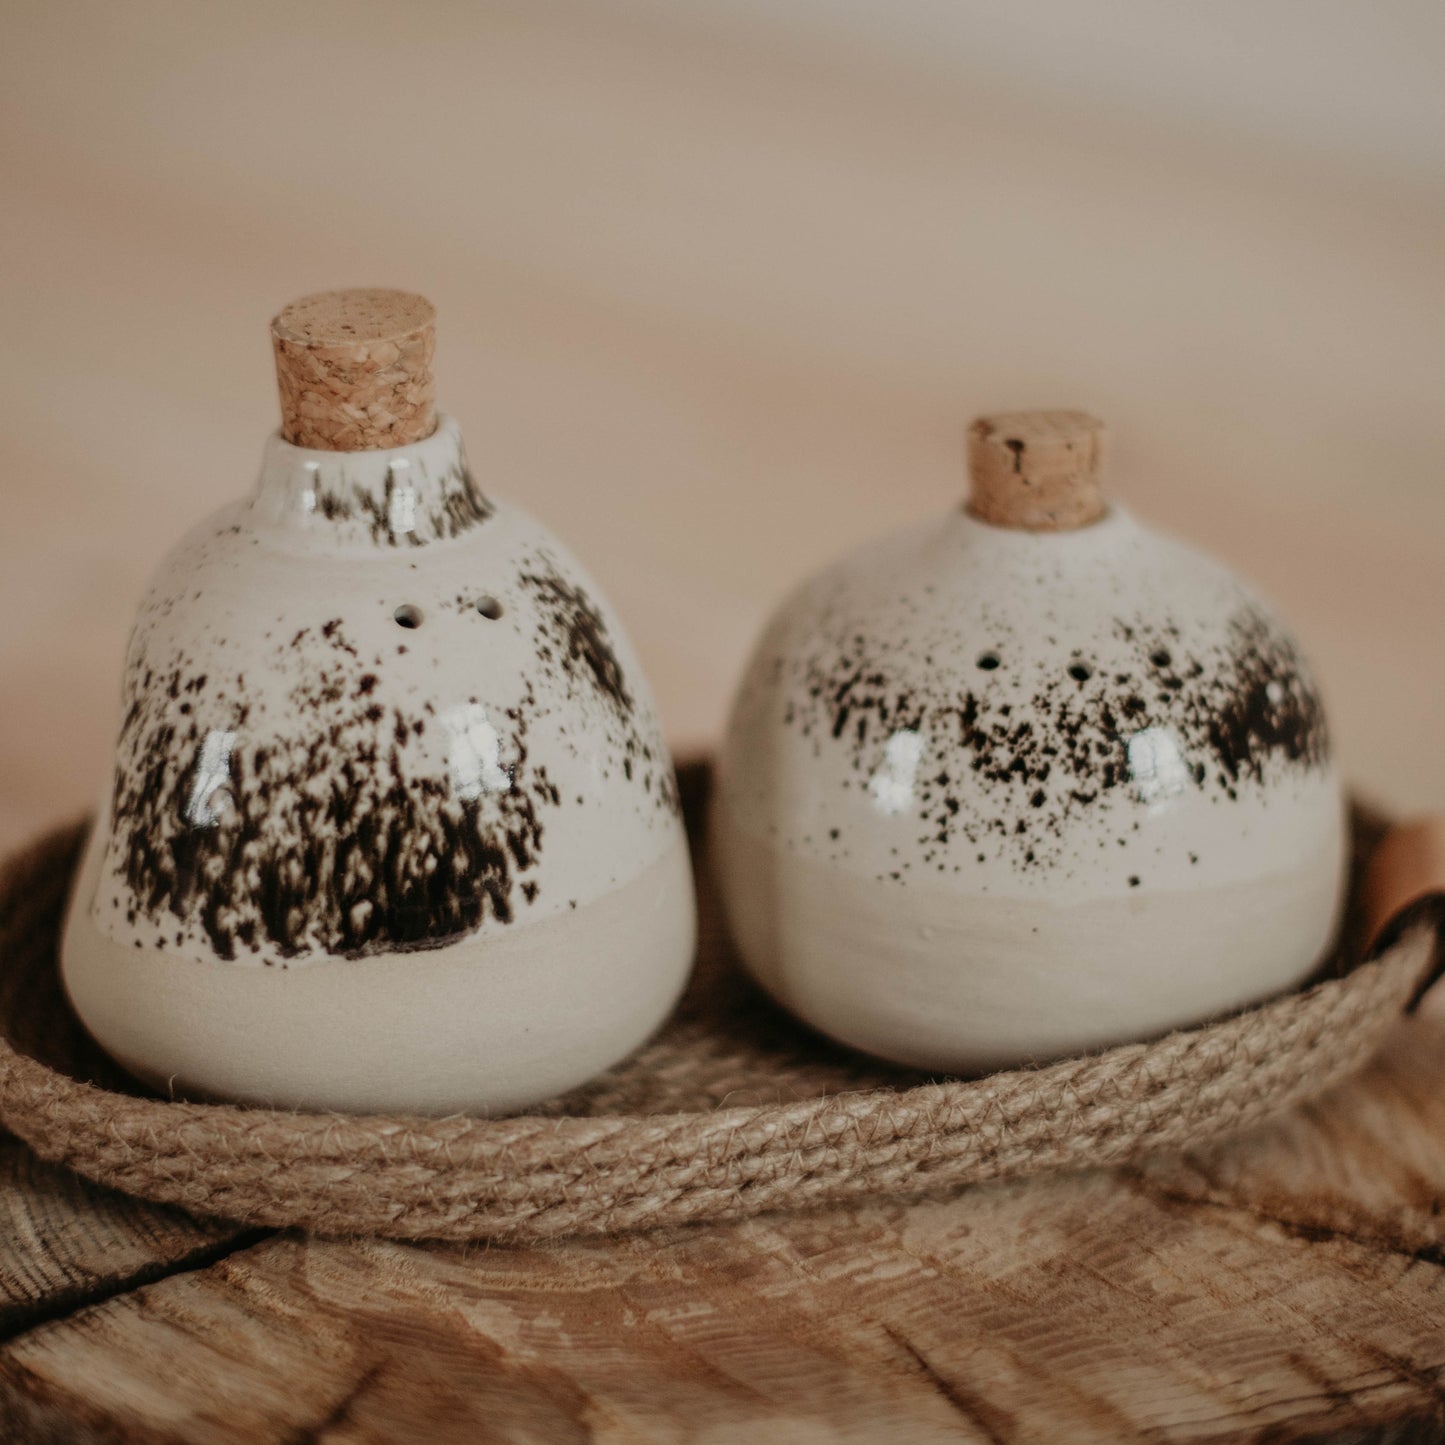 Perfect for any home décor, these handcrafted ceramic salt and pepper shakers are sure to add a touch of sophistication.